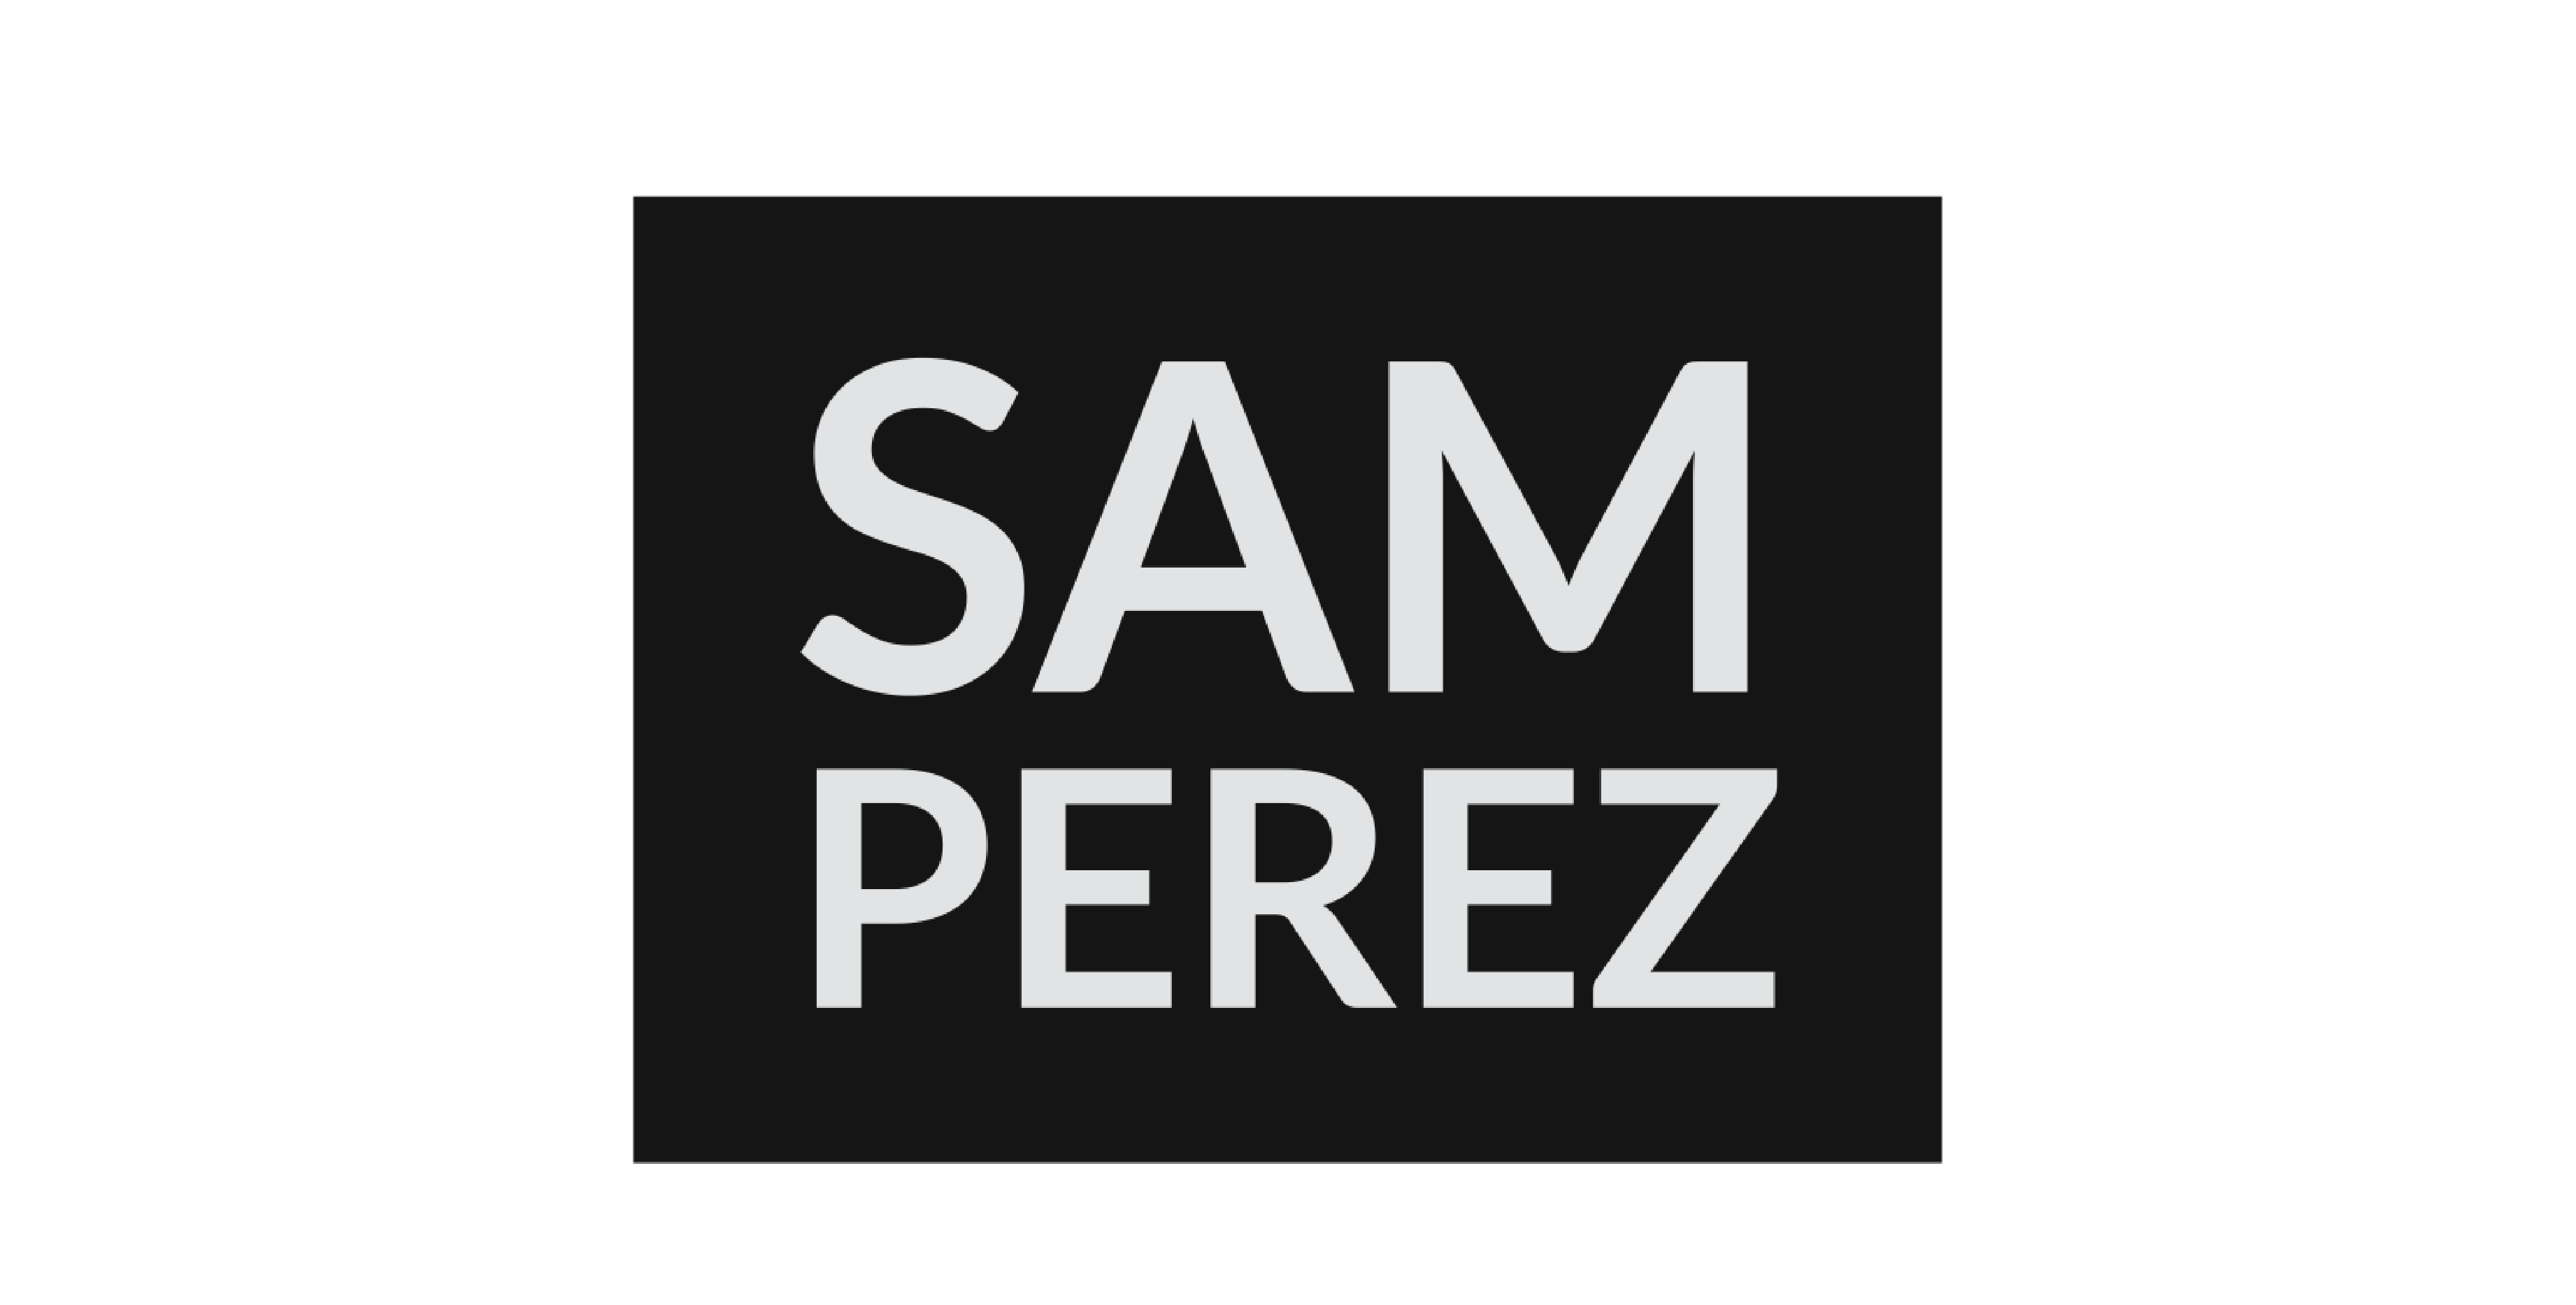 Sam Perez logo showing an S and a P